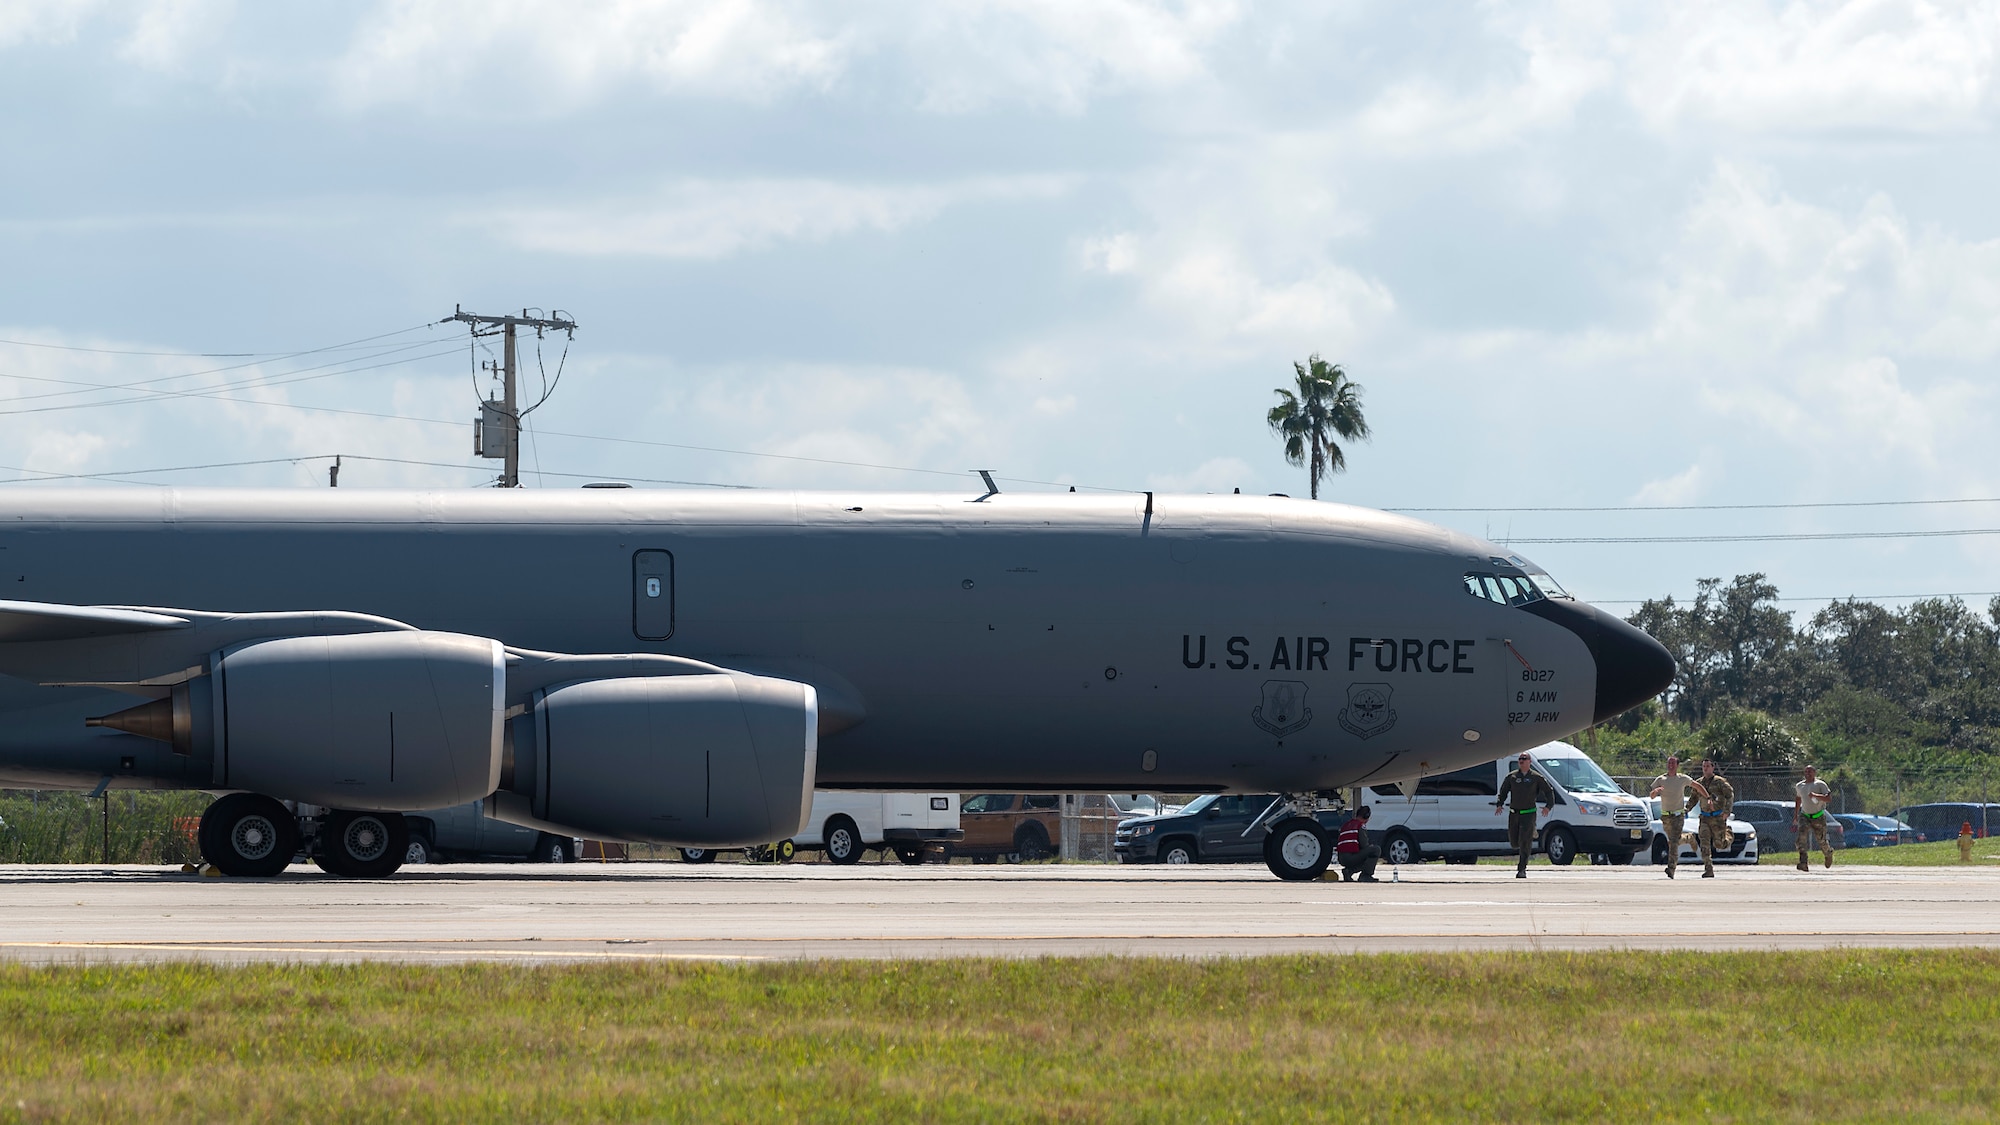 Aircrew members run toward a KC-135 Stratotanker during an operational readiness exercise (ORE) Oct. 24, 2019, at MacDill Air Force Base, Fla. The 6th Air Refueling Wing conducted the ORE to ensure proficiency and response times of various units on base during a simulated alert scenario.